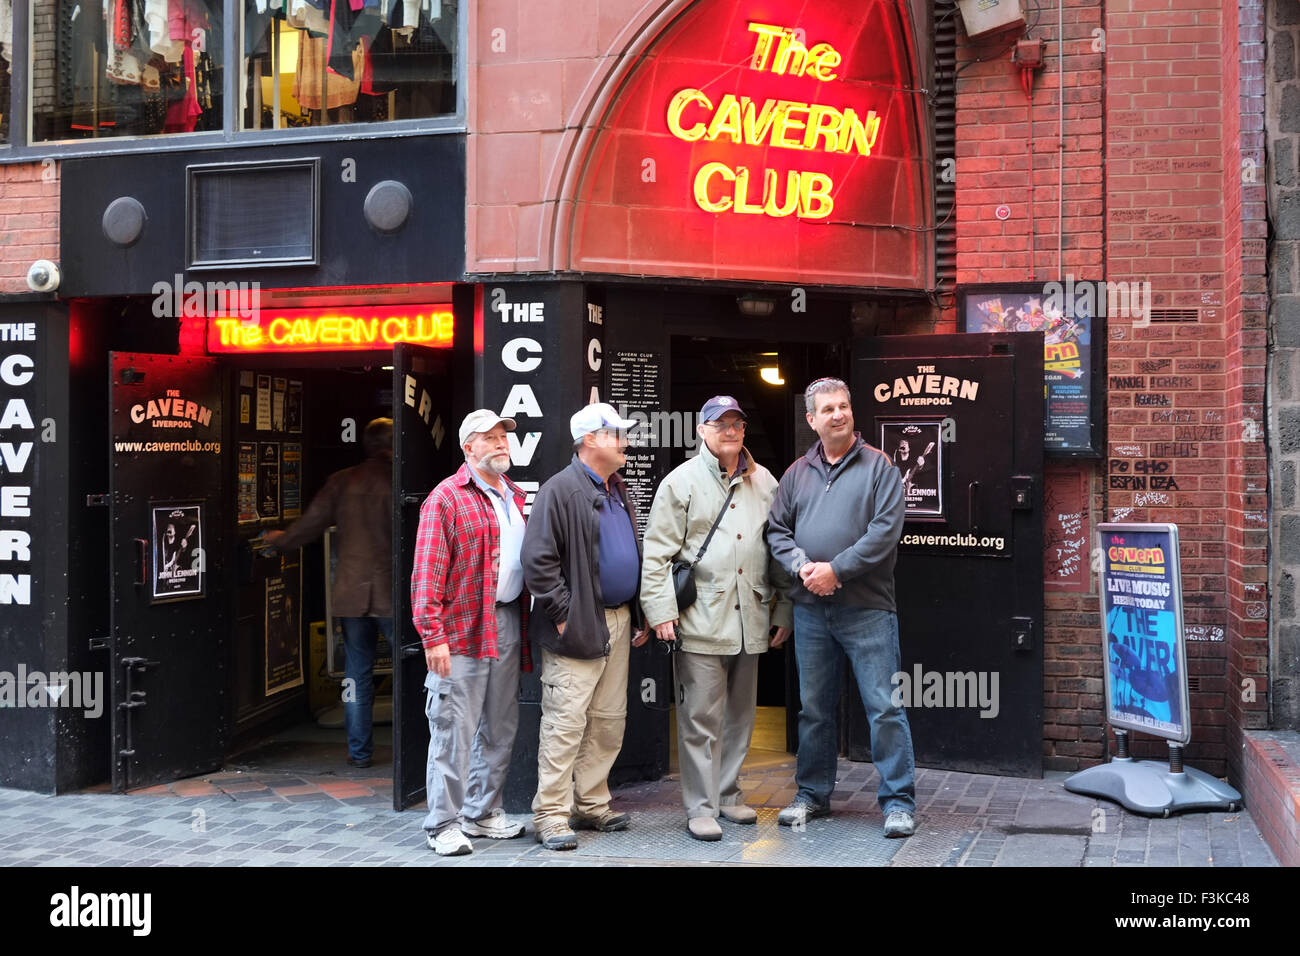 People outside the famous entertainment cavern club where the Beatles were discovered in Mathew Street, Liverpool, UK. Stock Photo